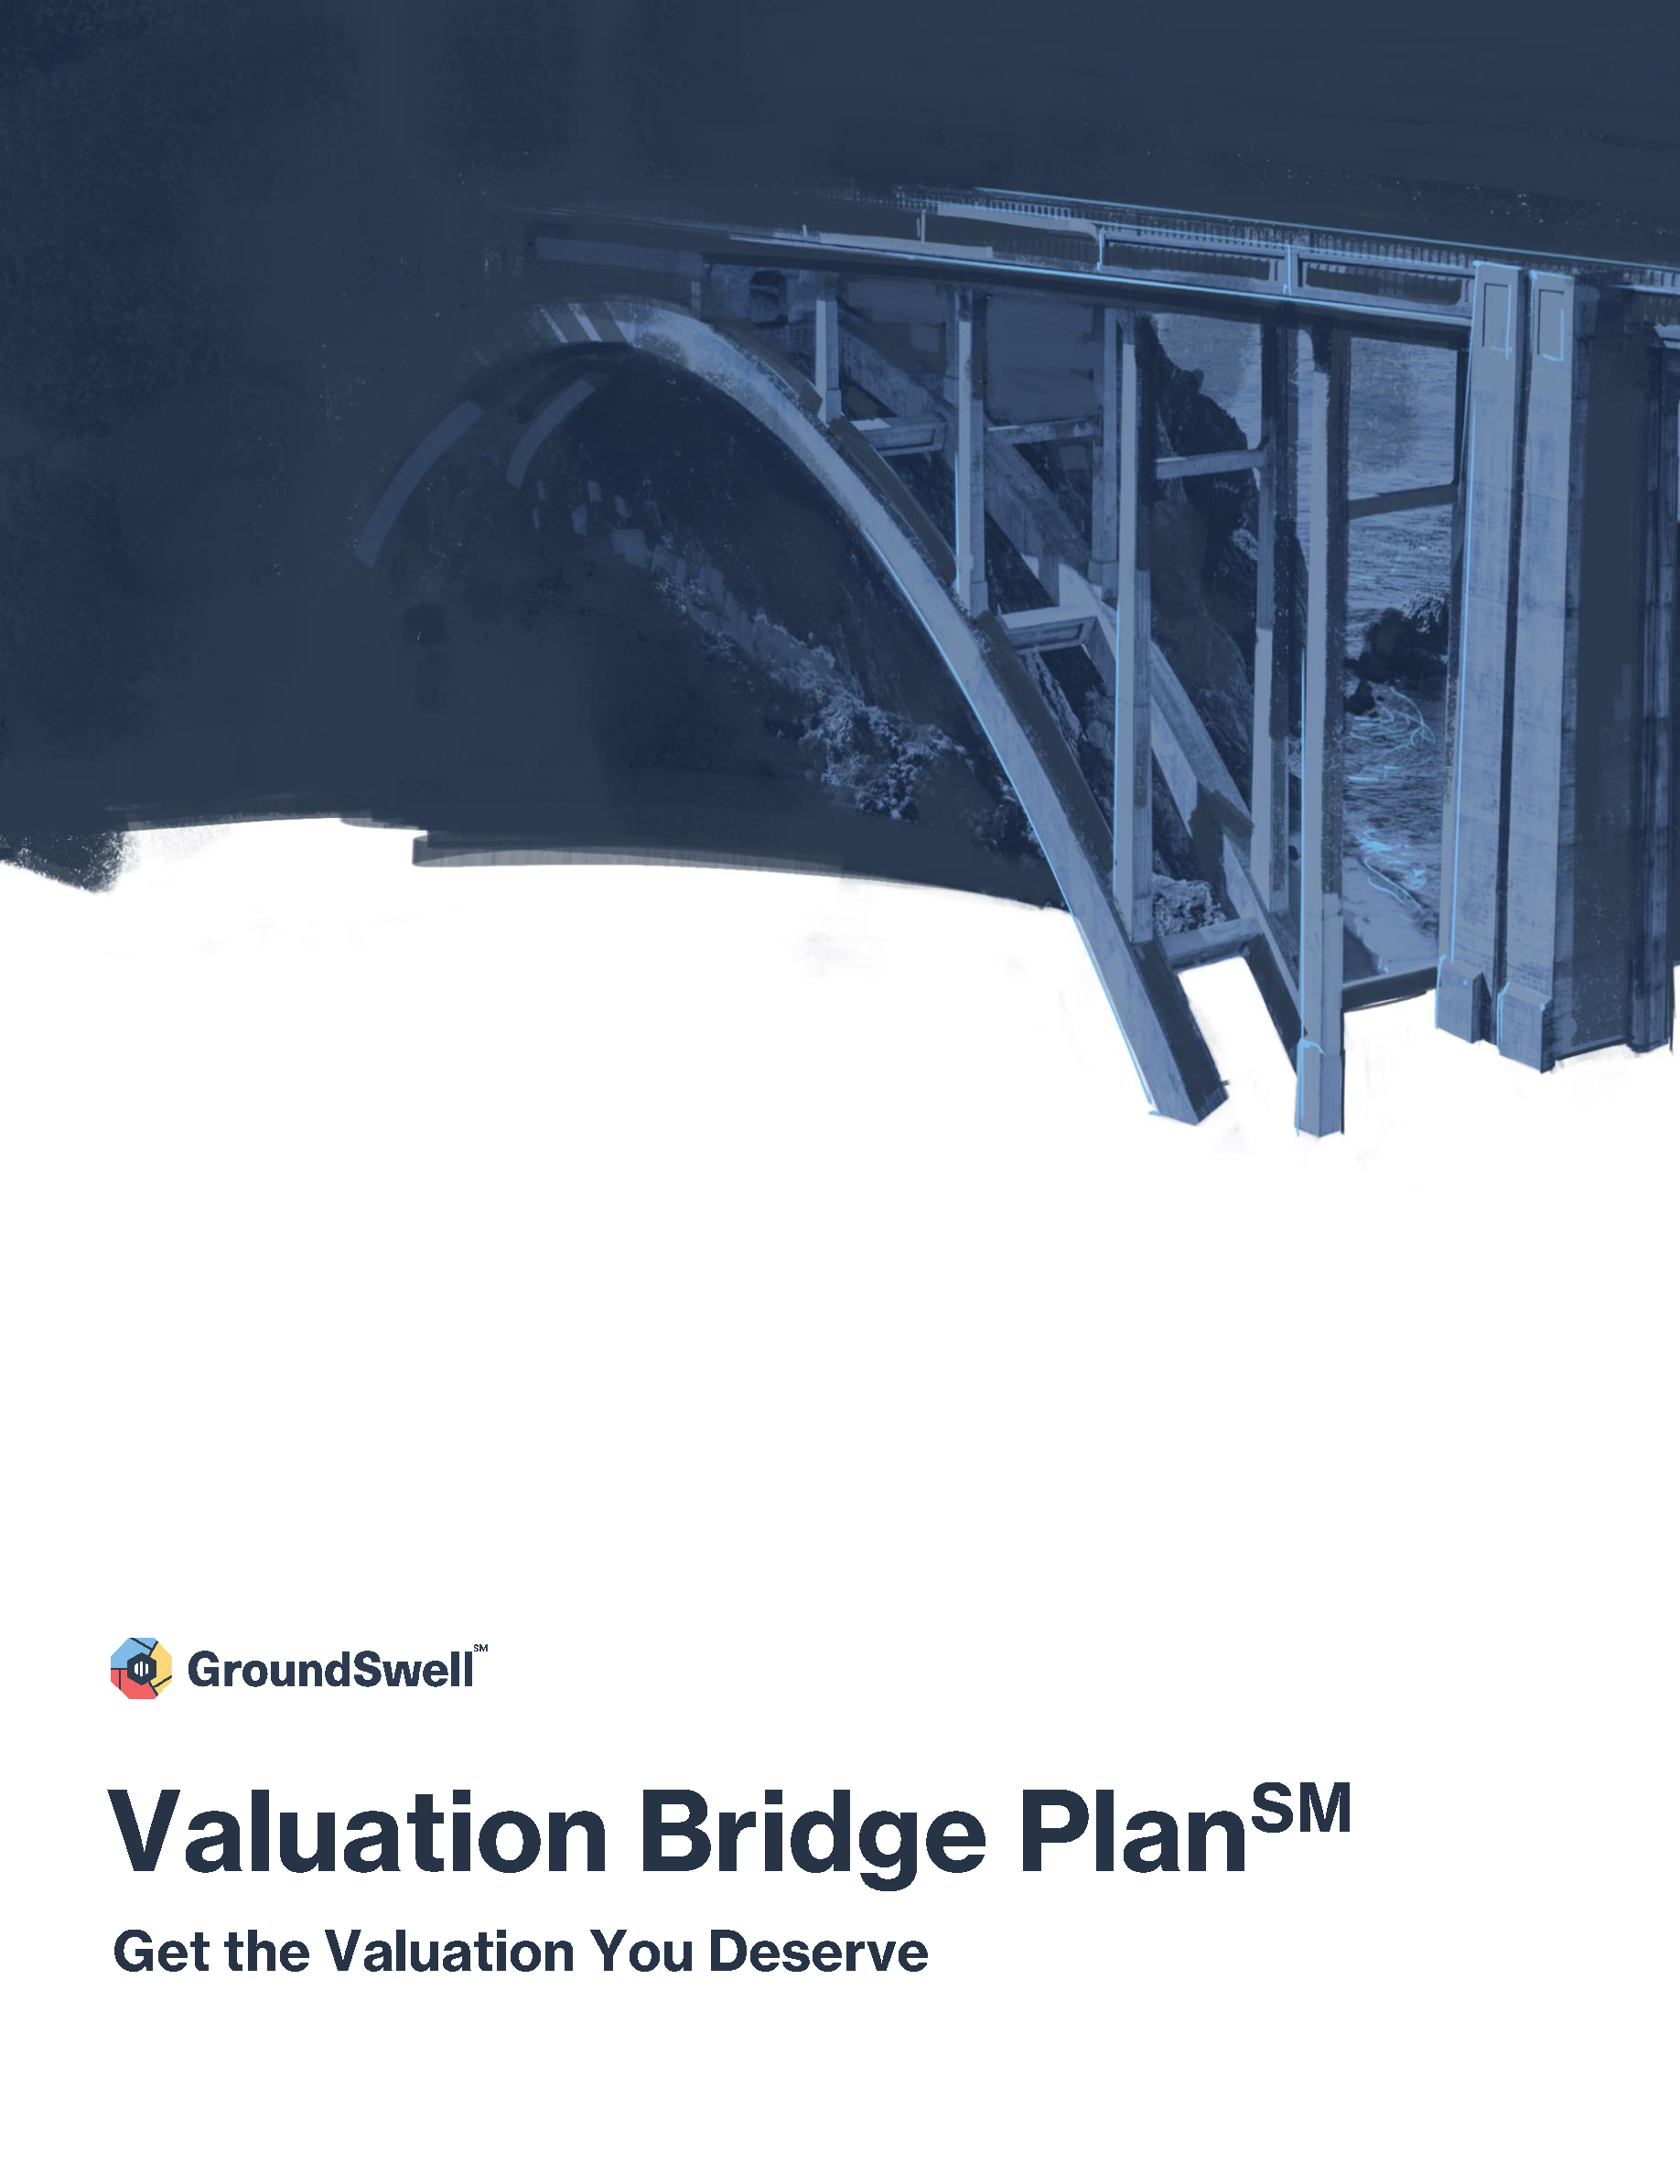 Cover page of a document with a bridge in the background